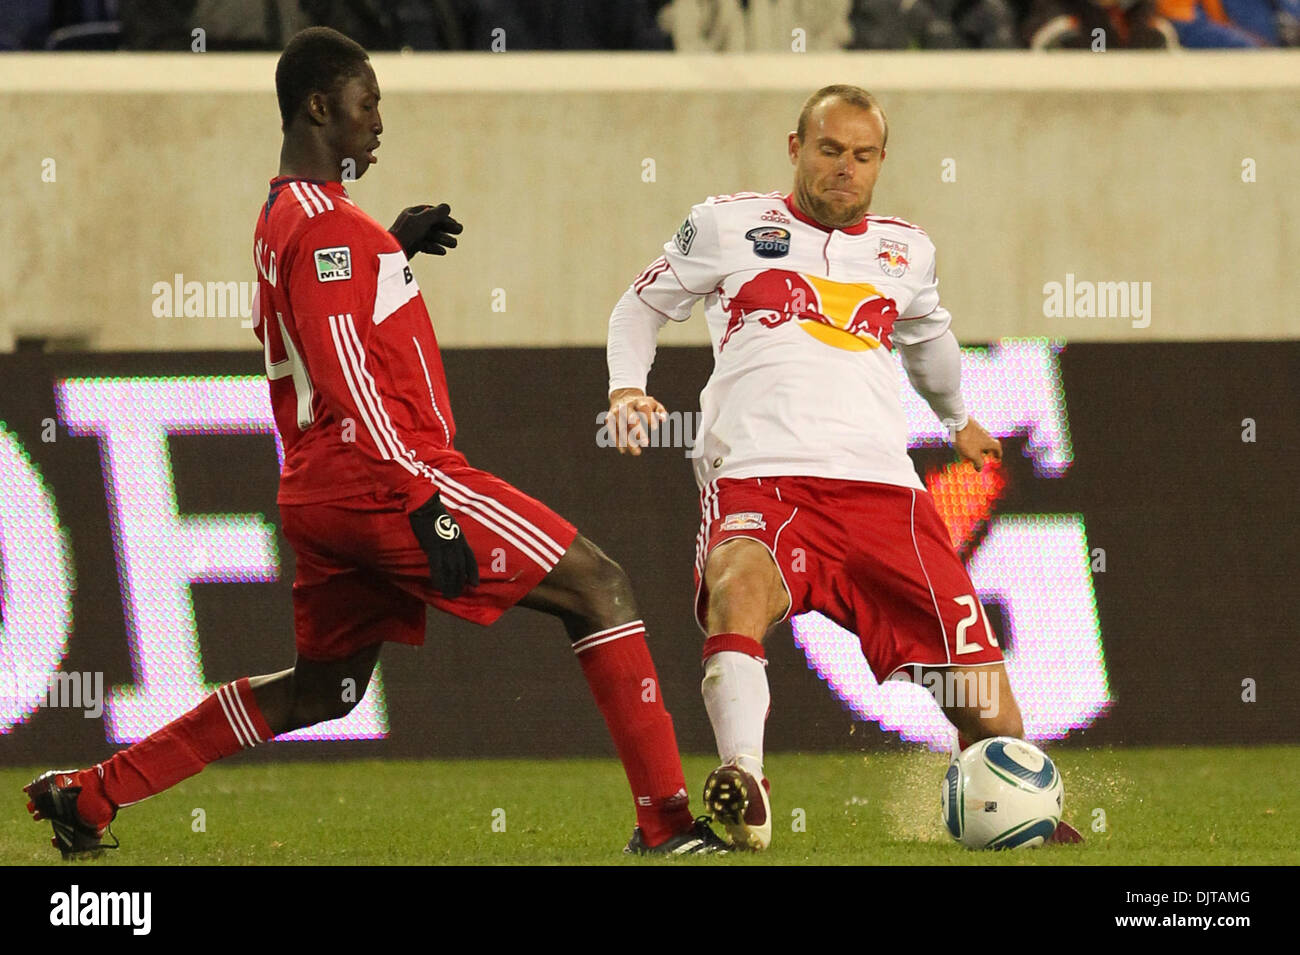 27  March 2010: Red Bulls M Joel Lindpere (#20) digs in to keep th ball from Chicago.  The Red Bulls defeated Chicago Fire 1-0  in the game held at Red Bull Arena, Harrison, NJ. (Credit Image: © Anthony Gruppuso/Southcreek Global/ZUMApress.com) Stock Photo